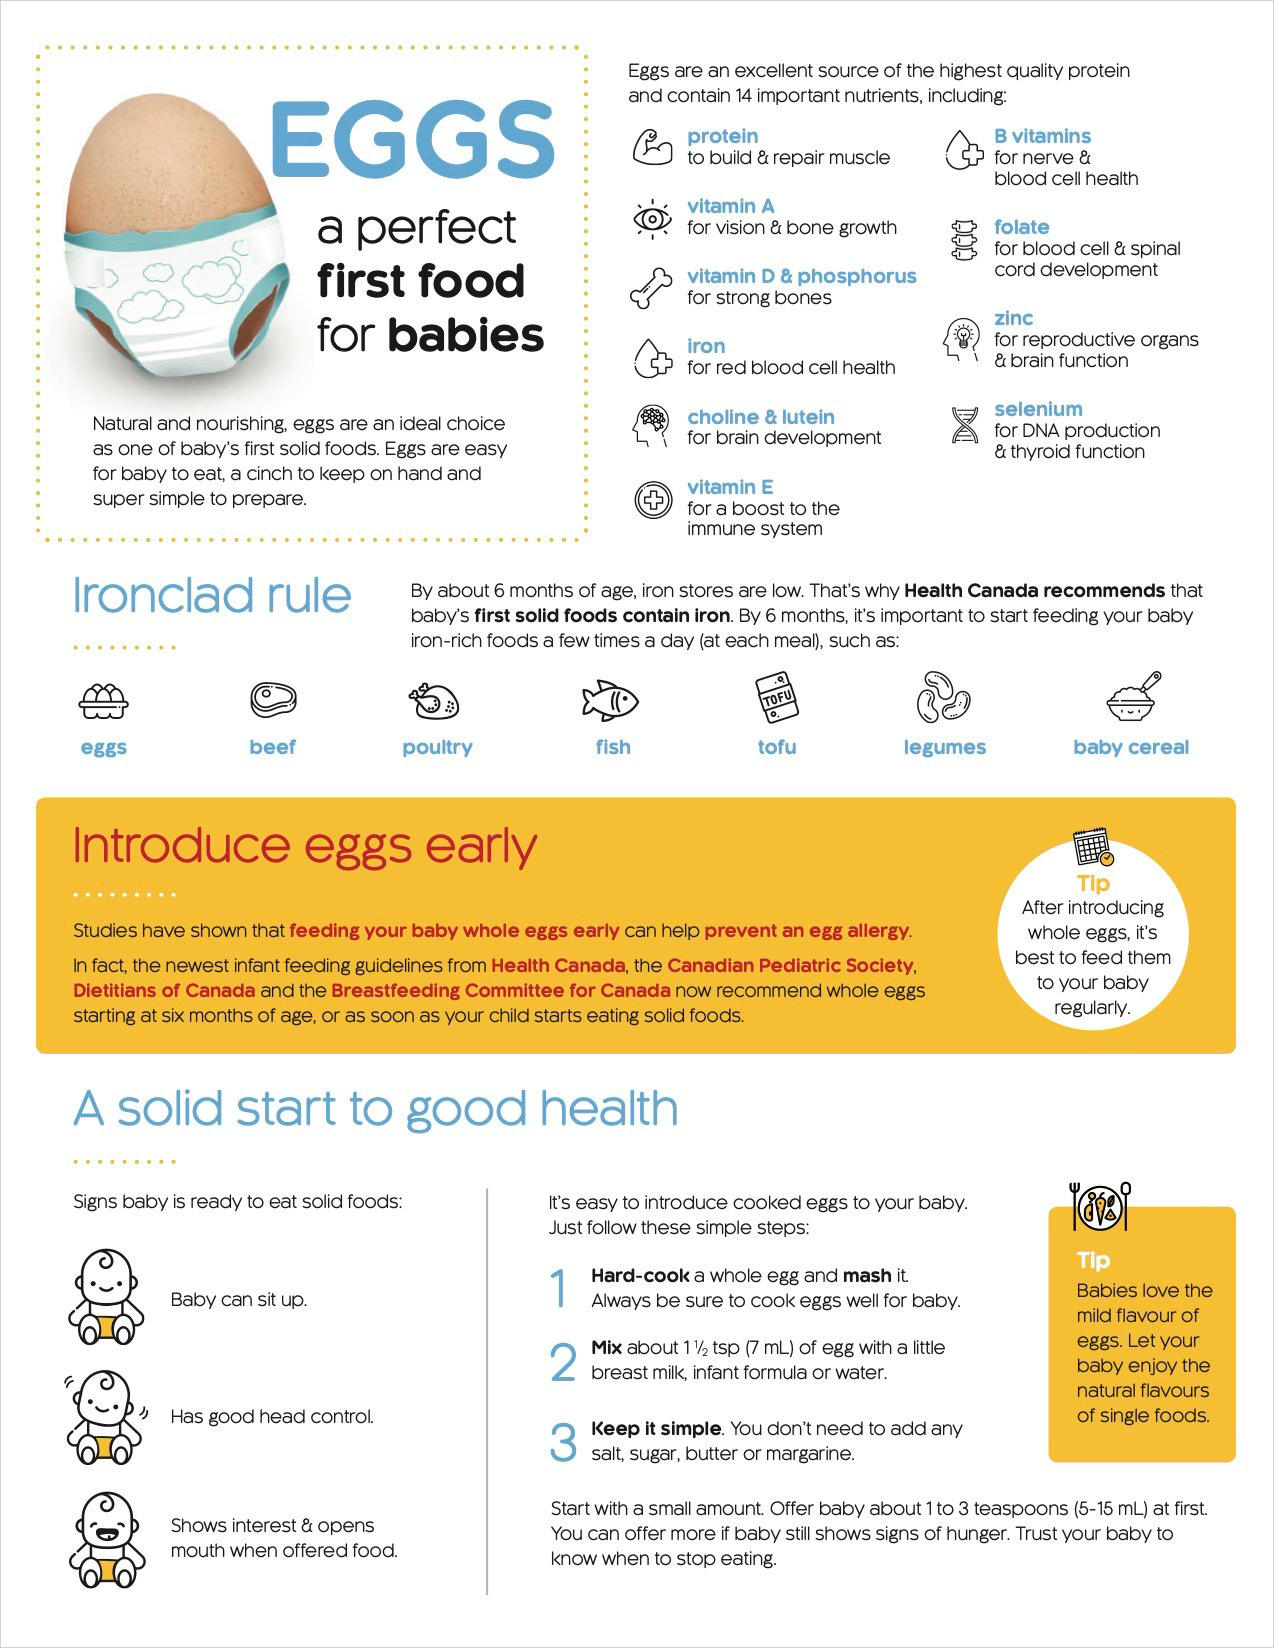 Eggs: A Perfect First Food For Babies